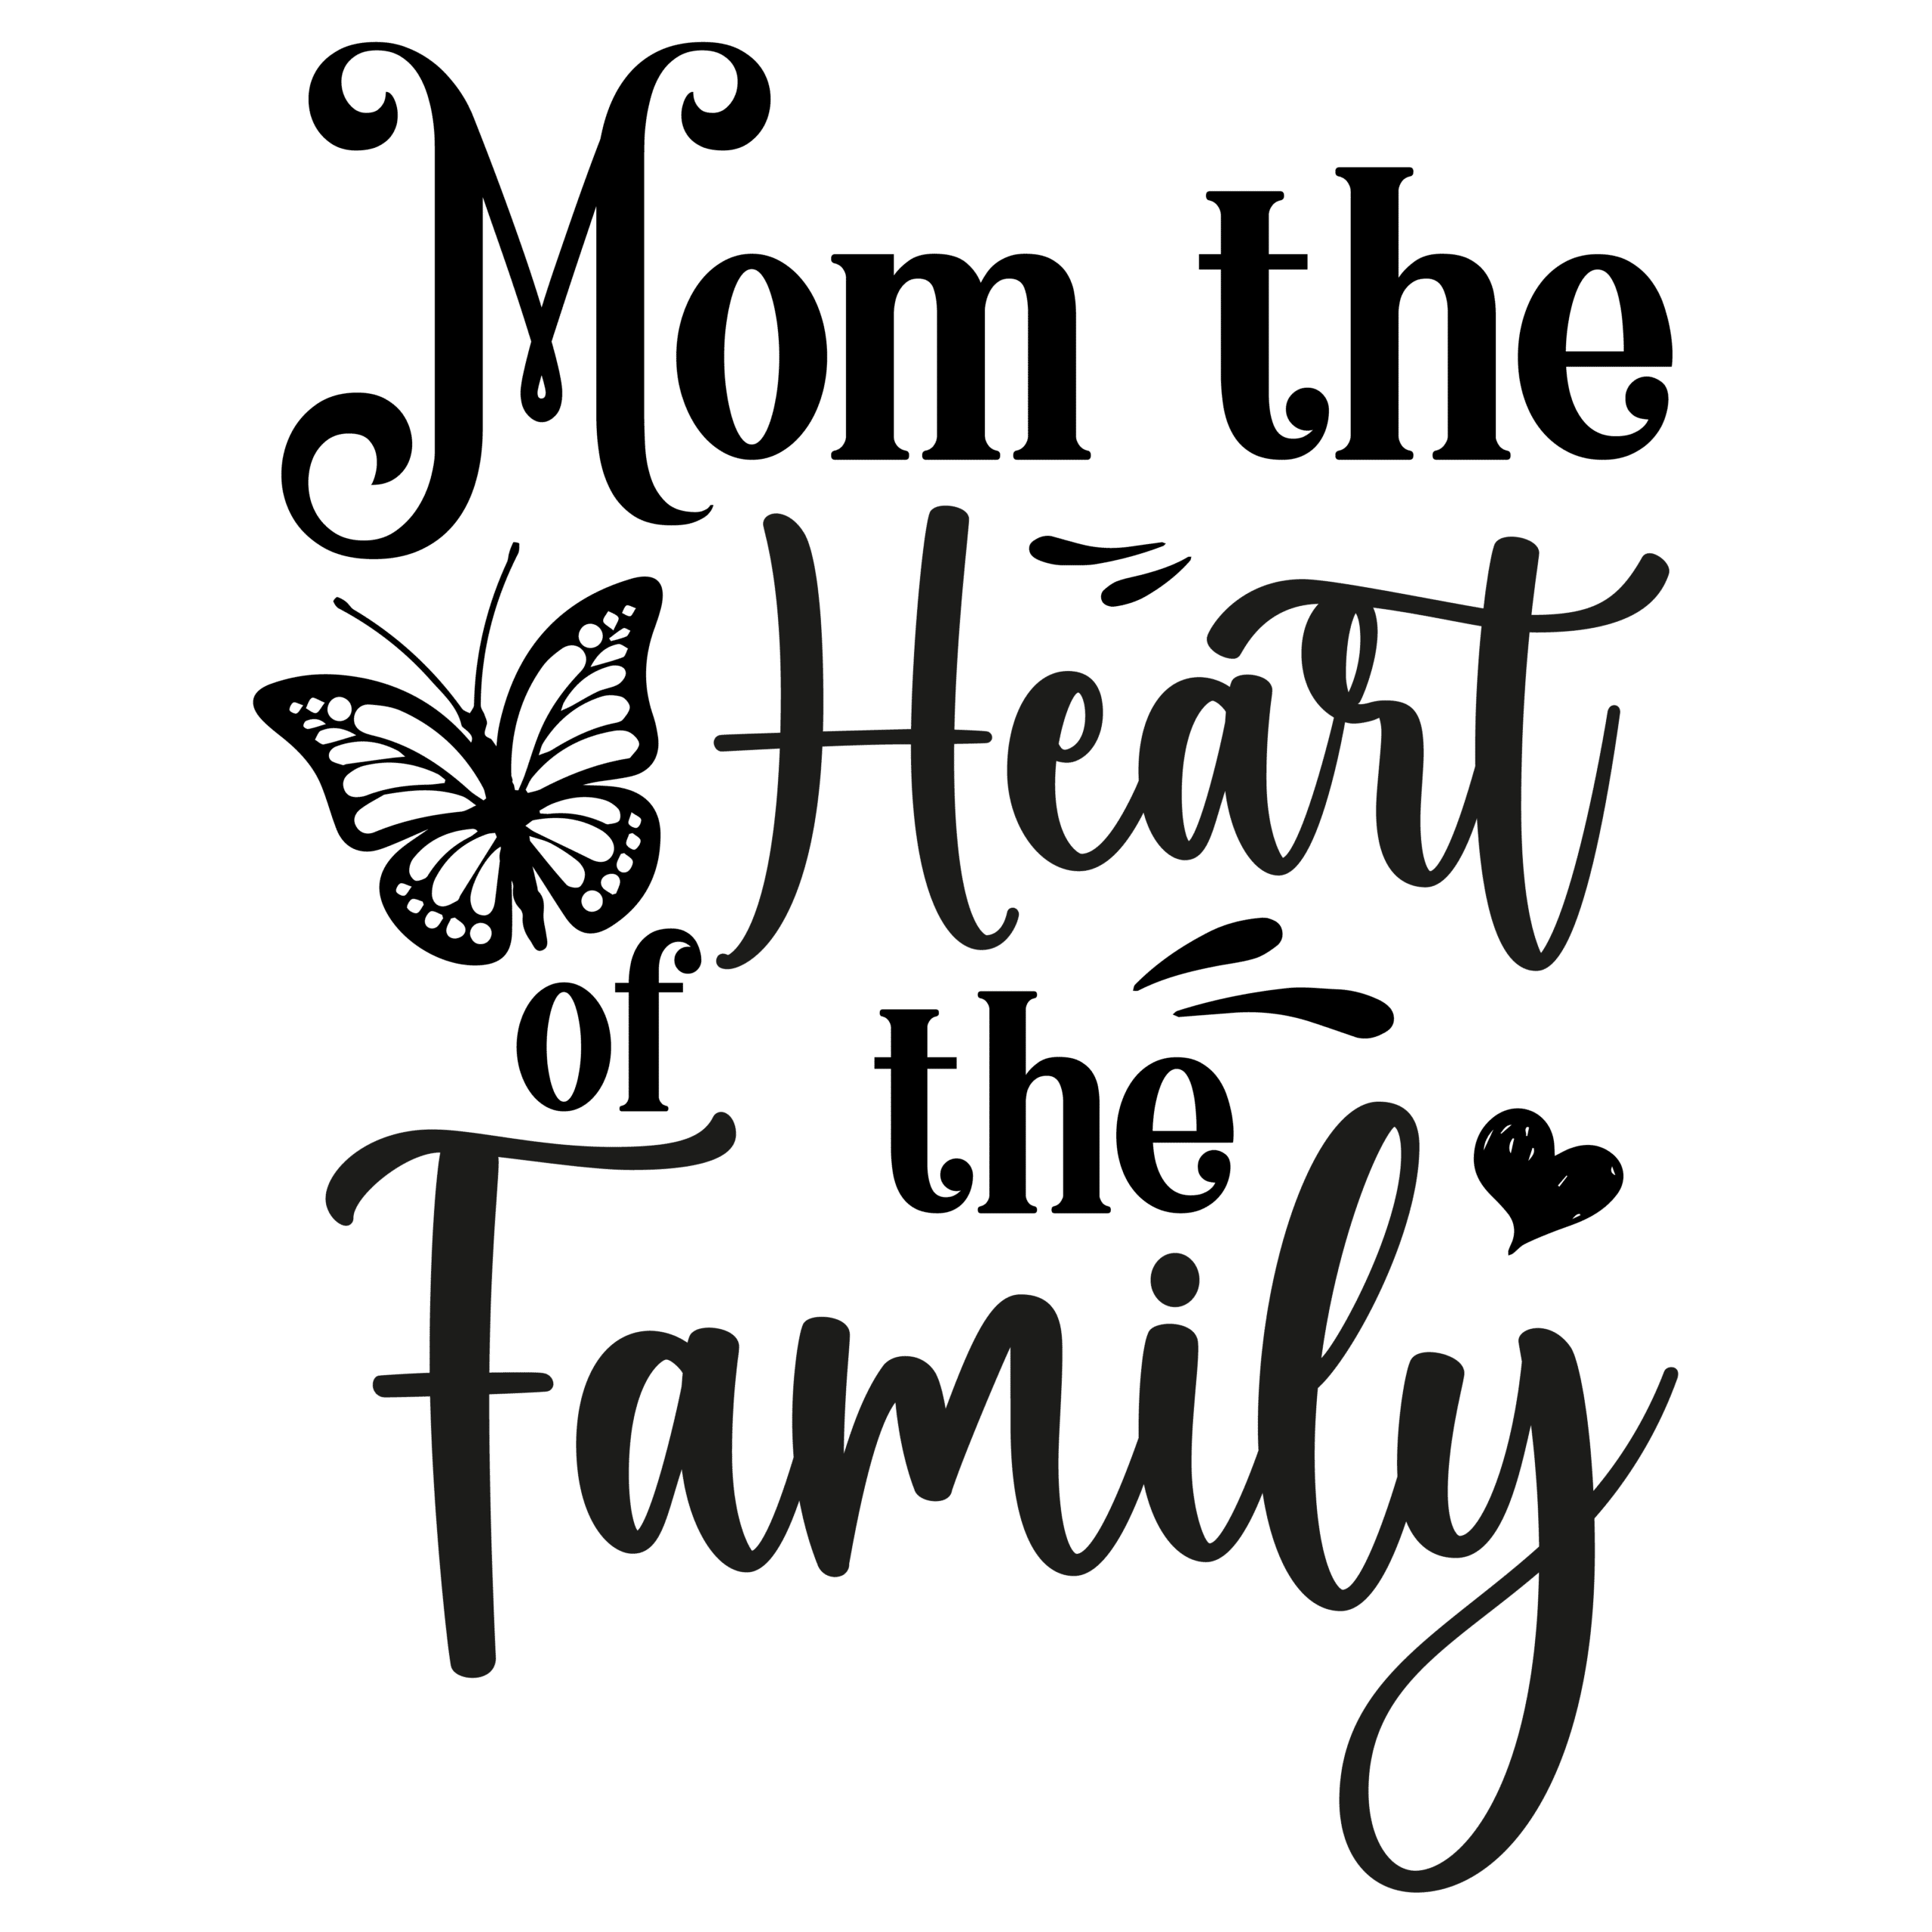 Mom the heart of the family-01